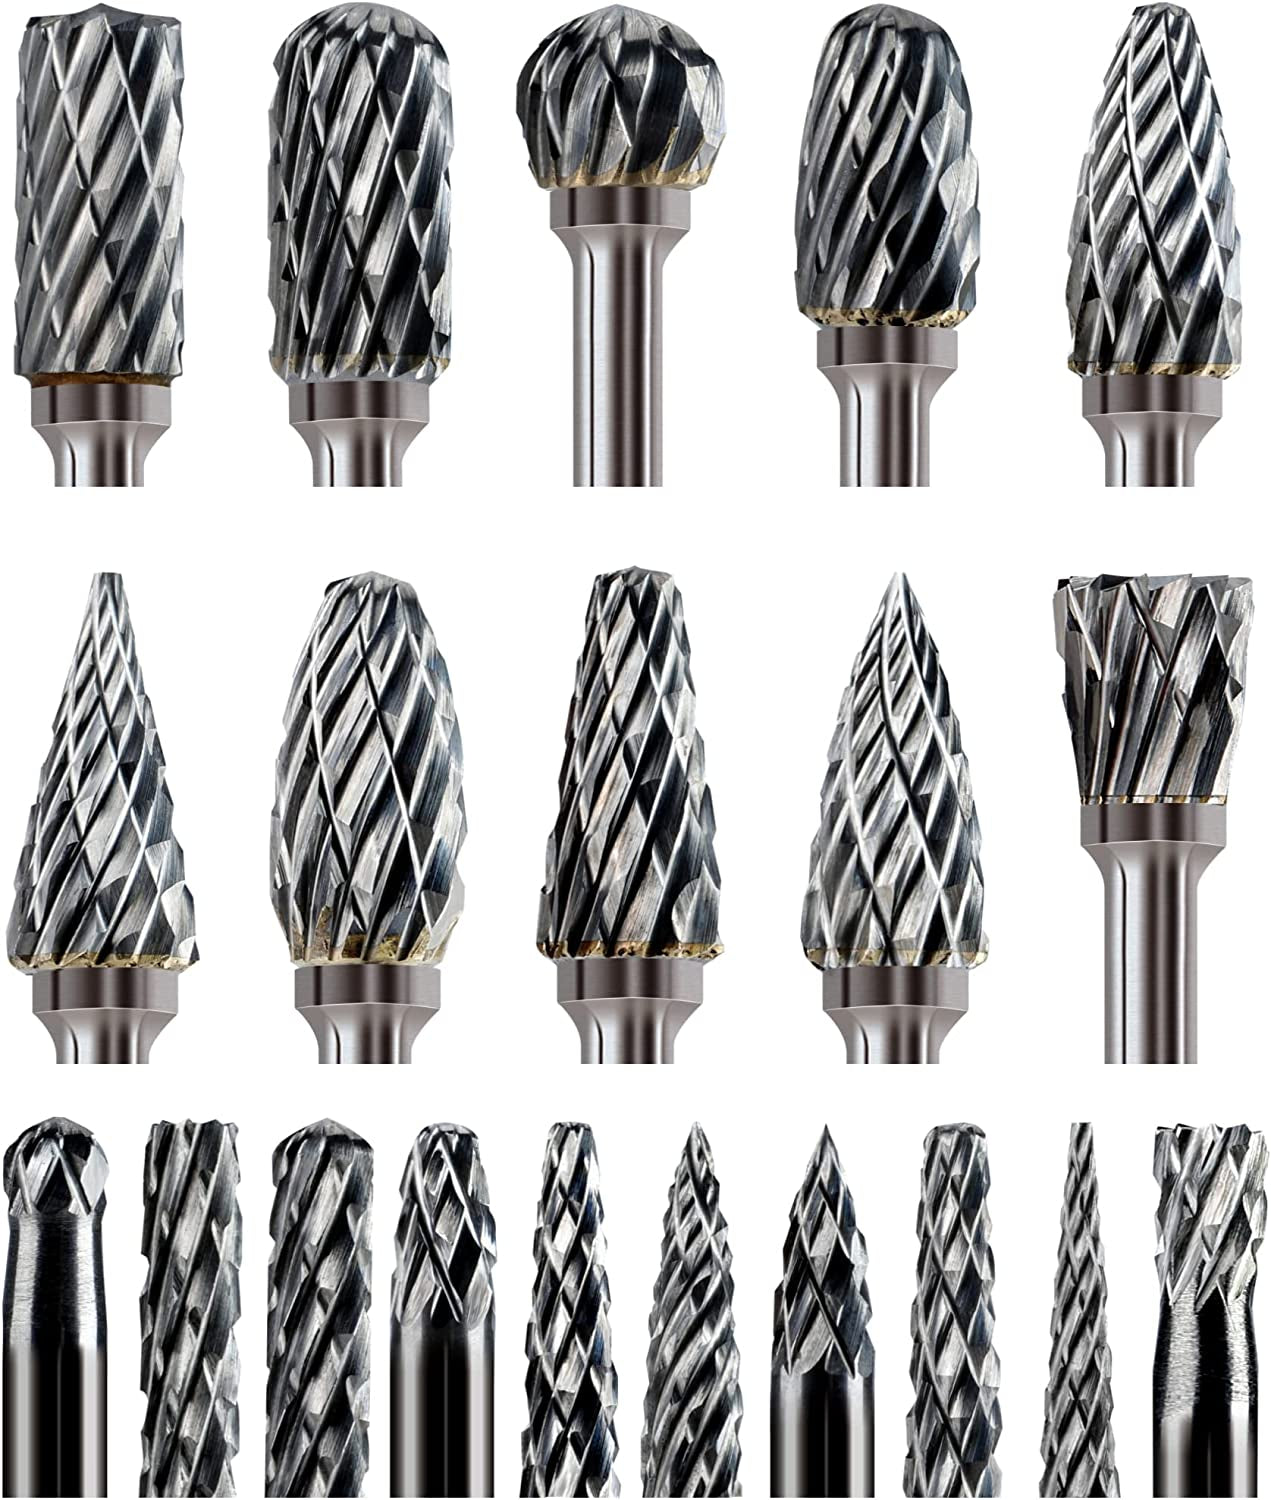 Carbide Burr Set Compatible with Dremel 1/8" Shank 20PCS Die Grinder Rotary Tool Rasp Bits Wood Carving Accessories Attachments Cutting Burrs Metal Grinding Engraving Porting Double Cut